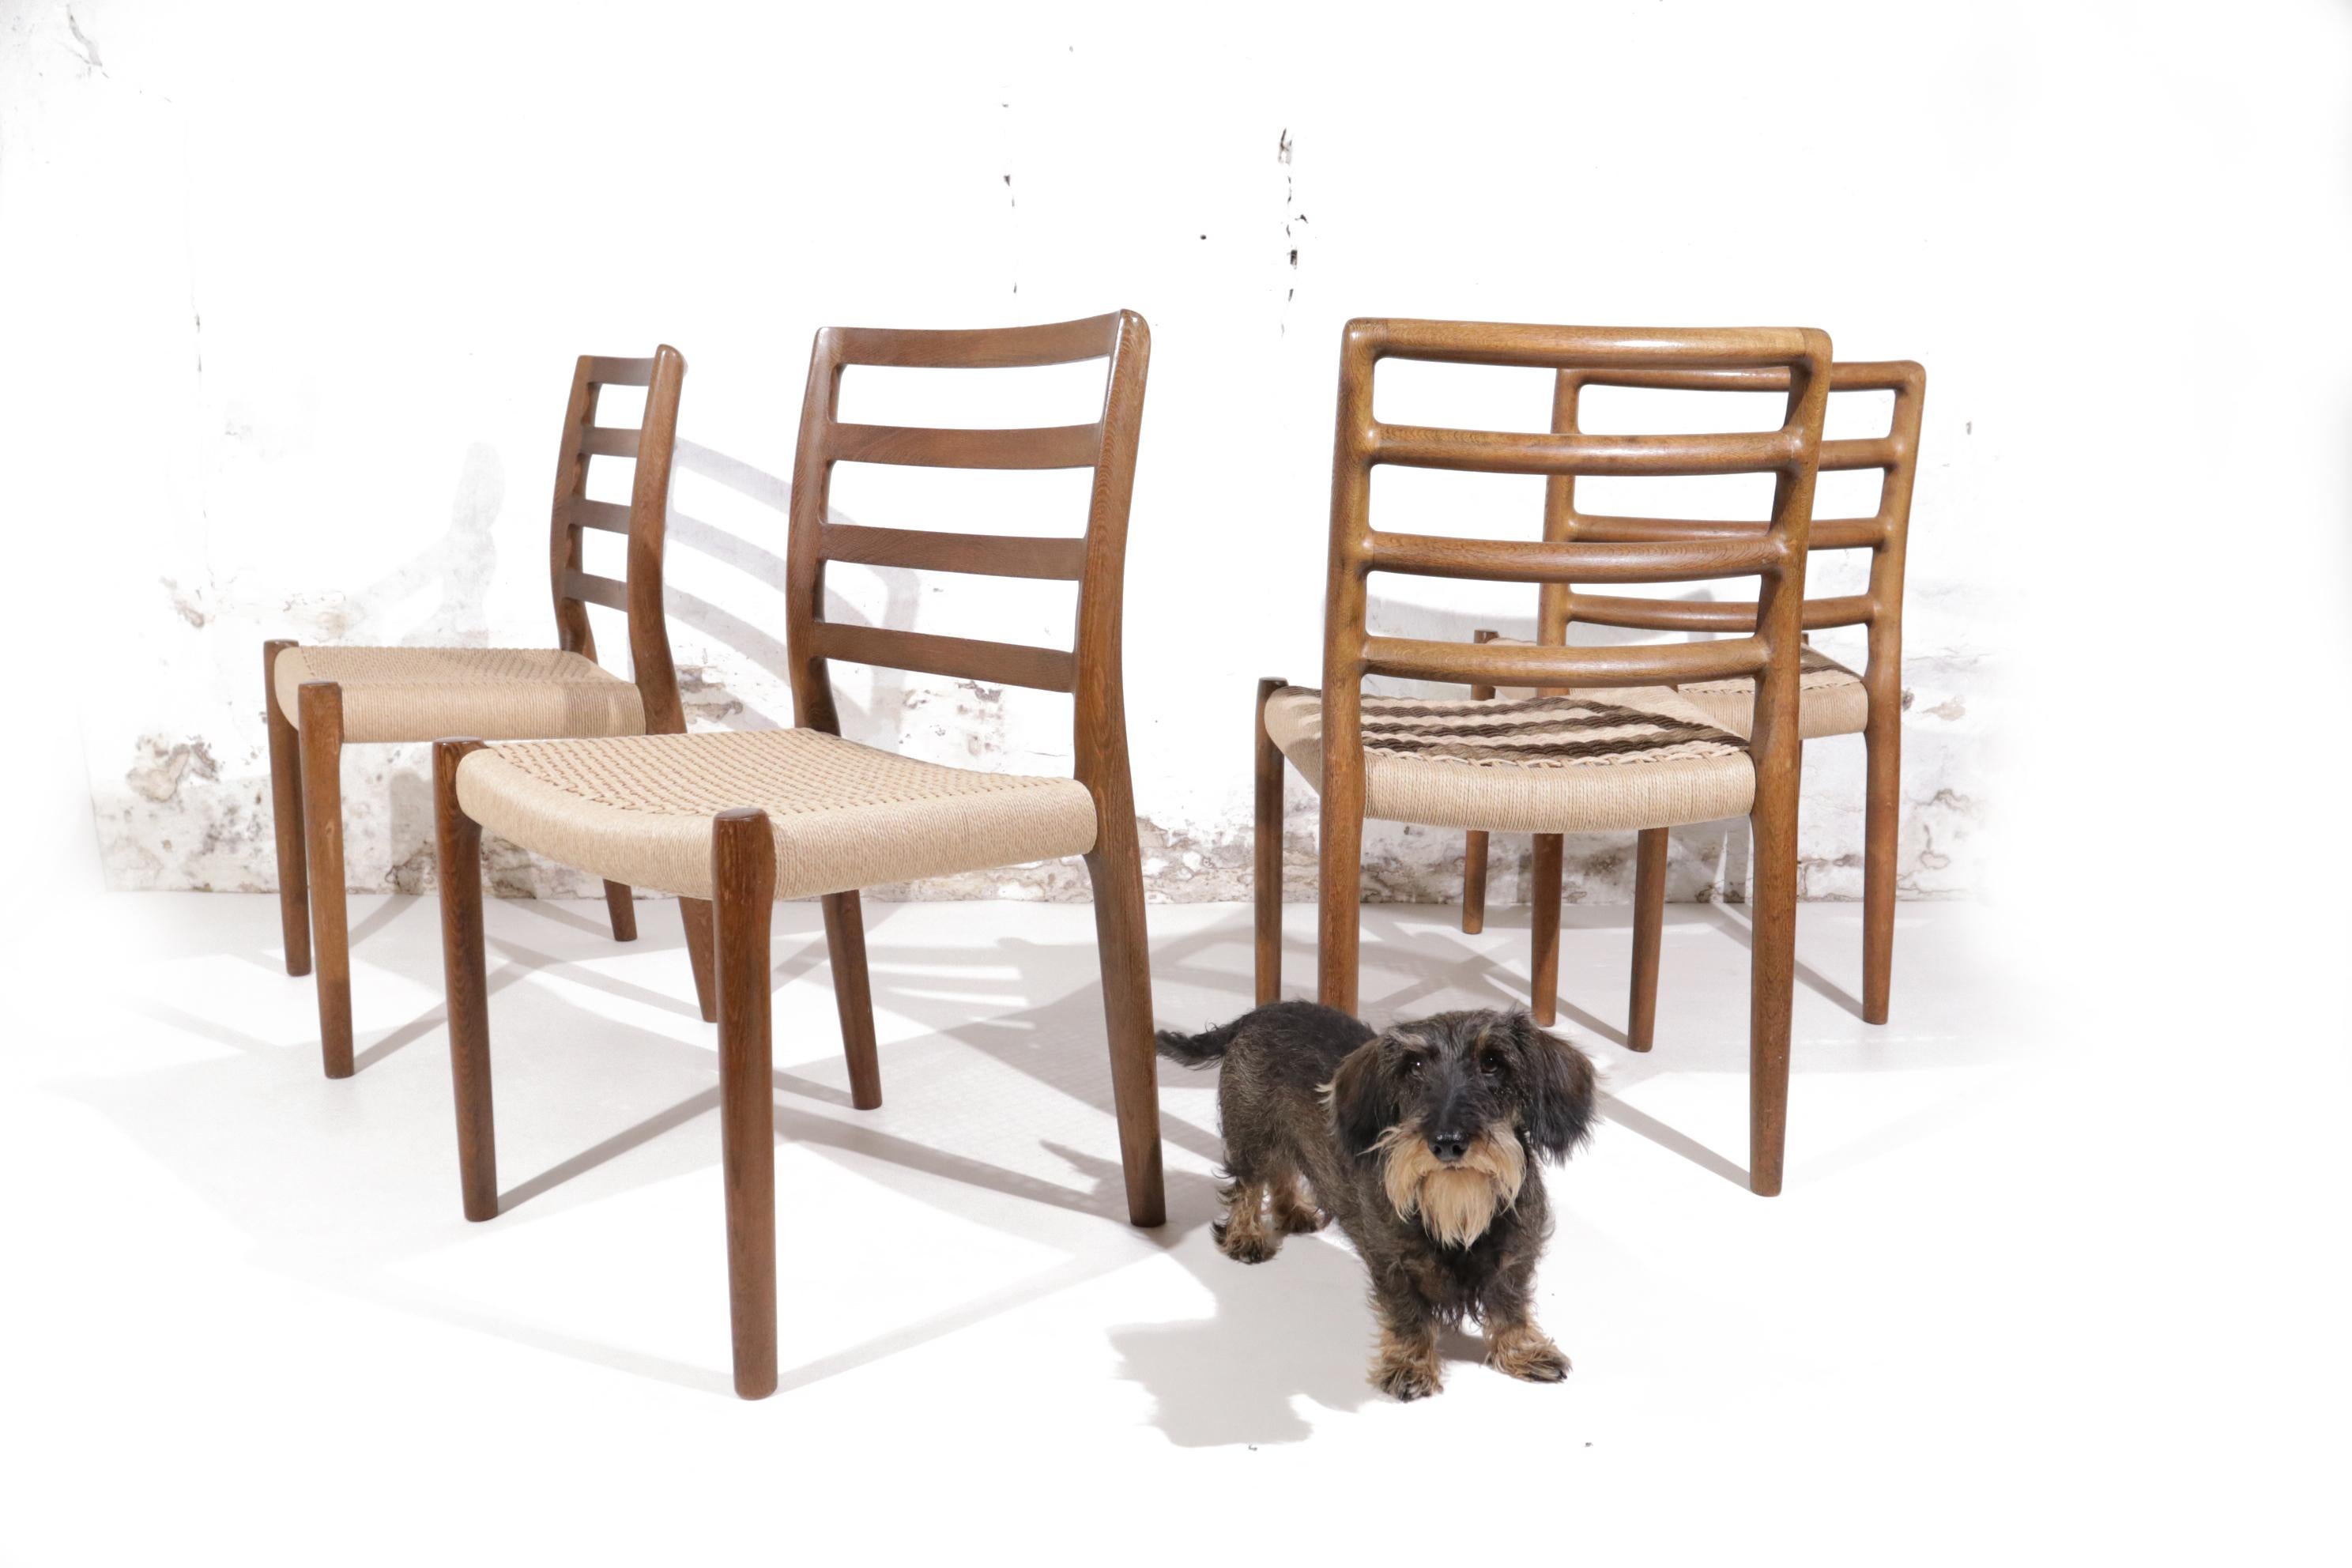 A set of 4 model 85 dining chairs designed by Niels Otto Moller for J.L. Møllers in the 1960's
Oak frame and renewed Papercord seating.
In very nice condition.

Keywords; Elegance, Durable, Pure, Natural materials, Art, Sculptural, Classical,